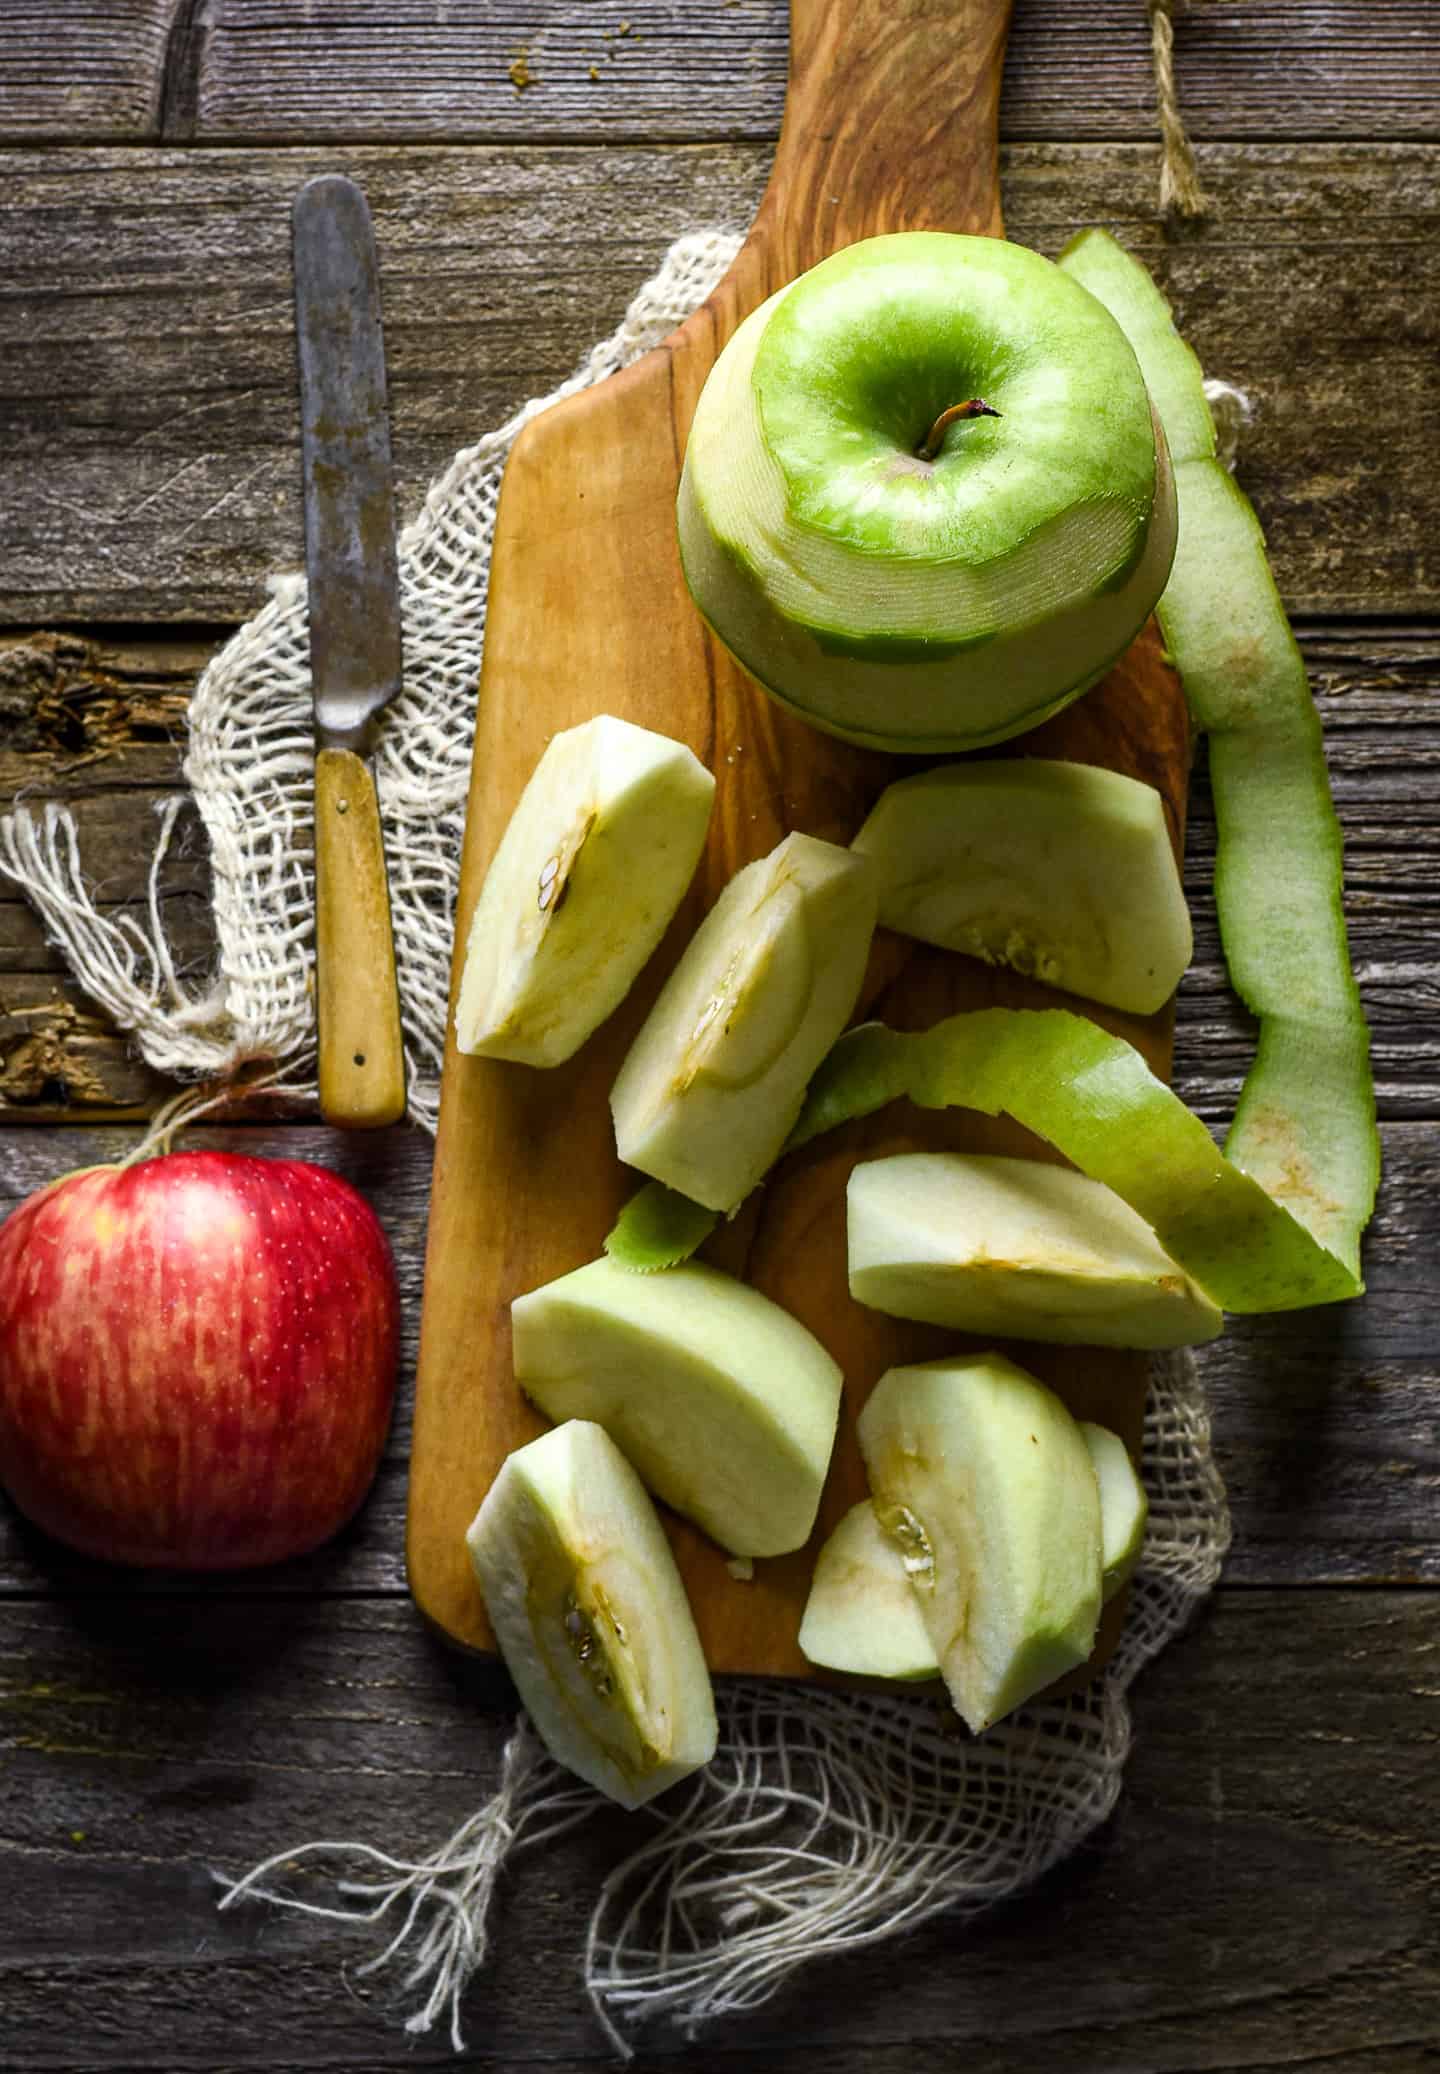 sliced green apple and red apple.